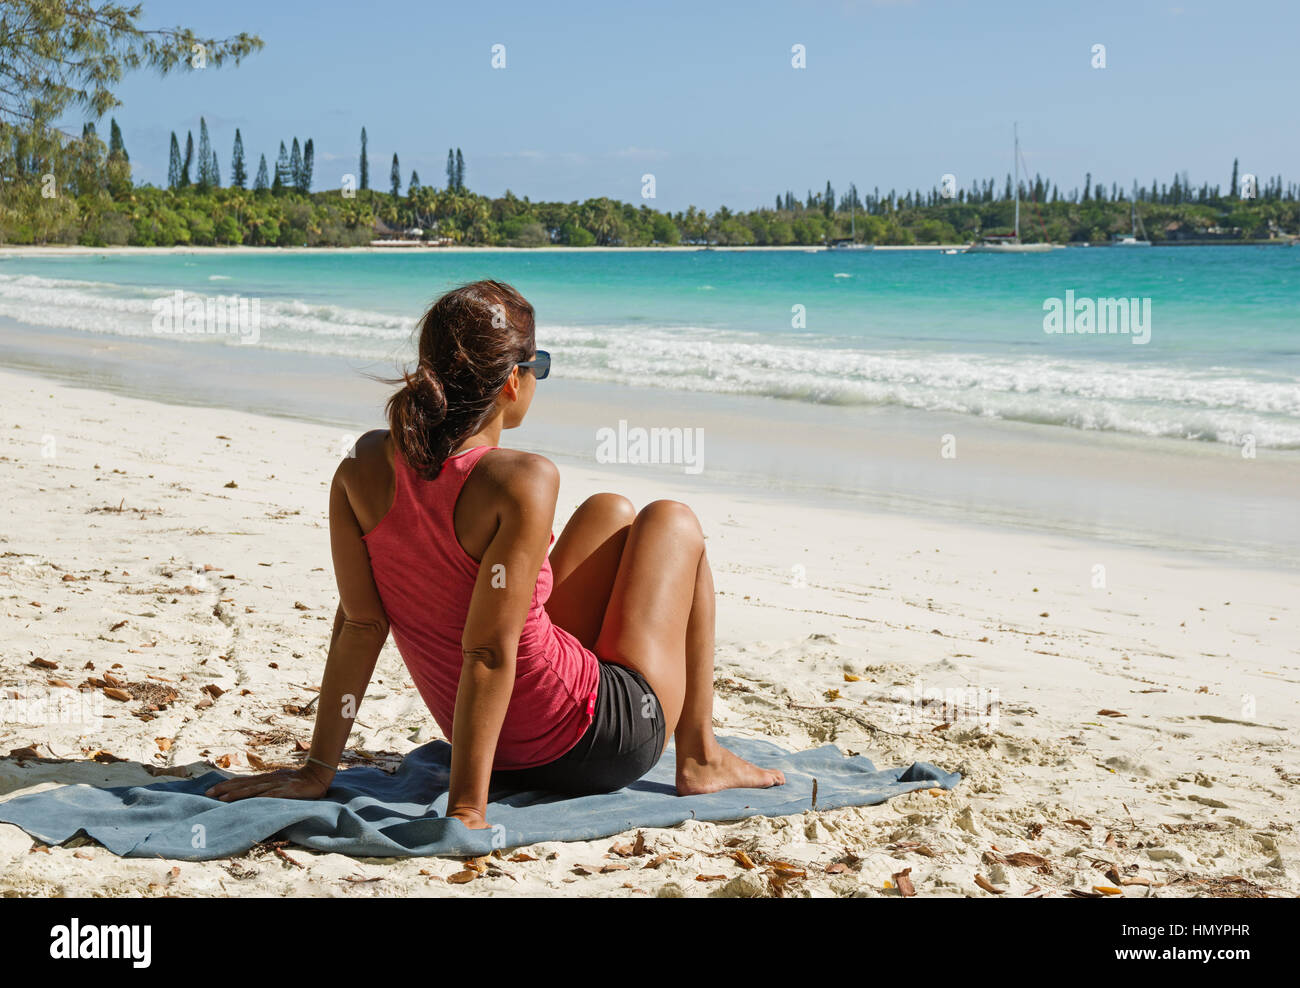 a woman sits on a tropical beach on Isle Of Pines in New Caledonia Stock Photo